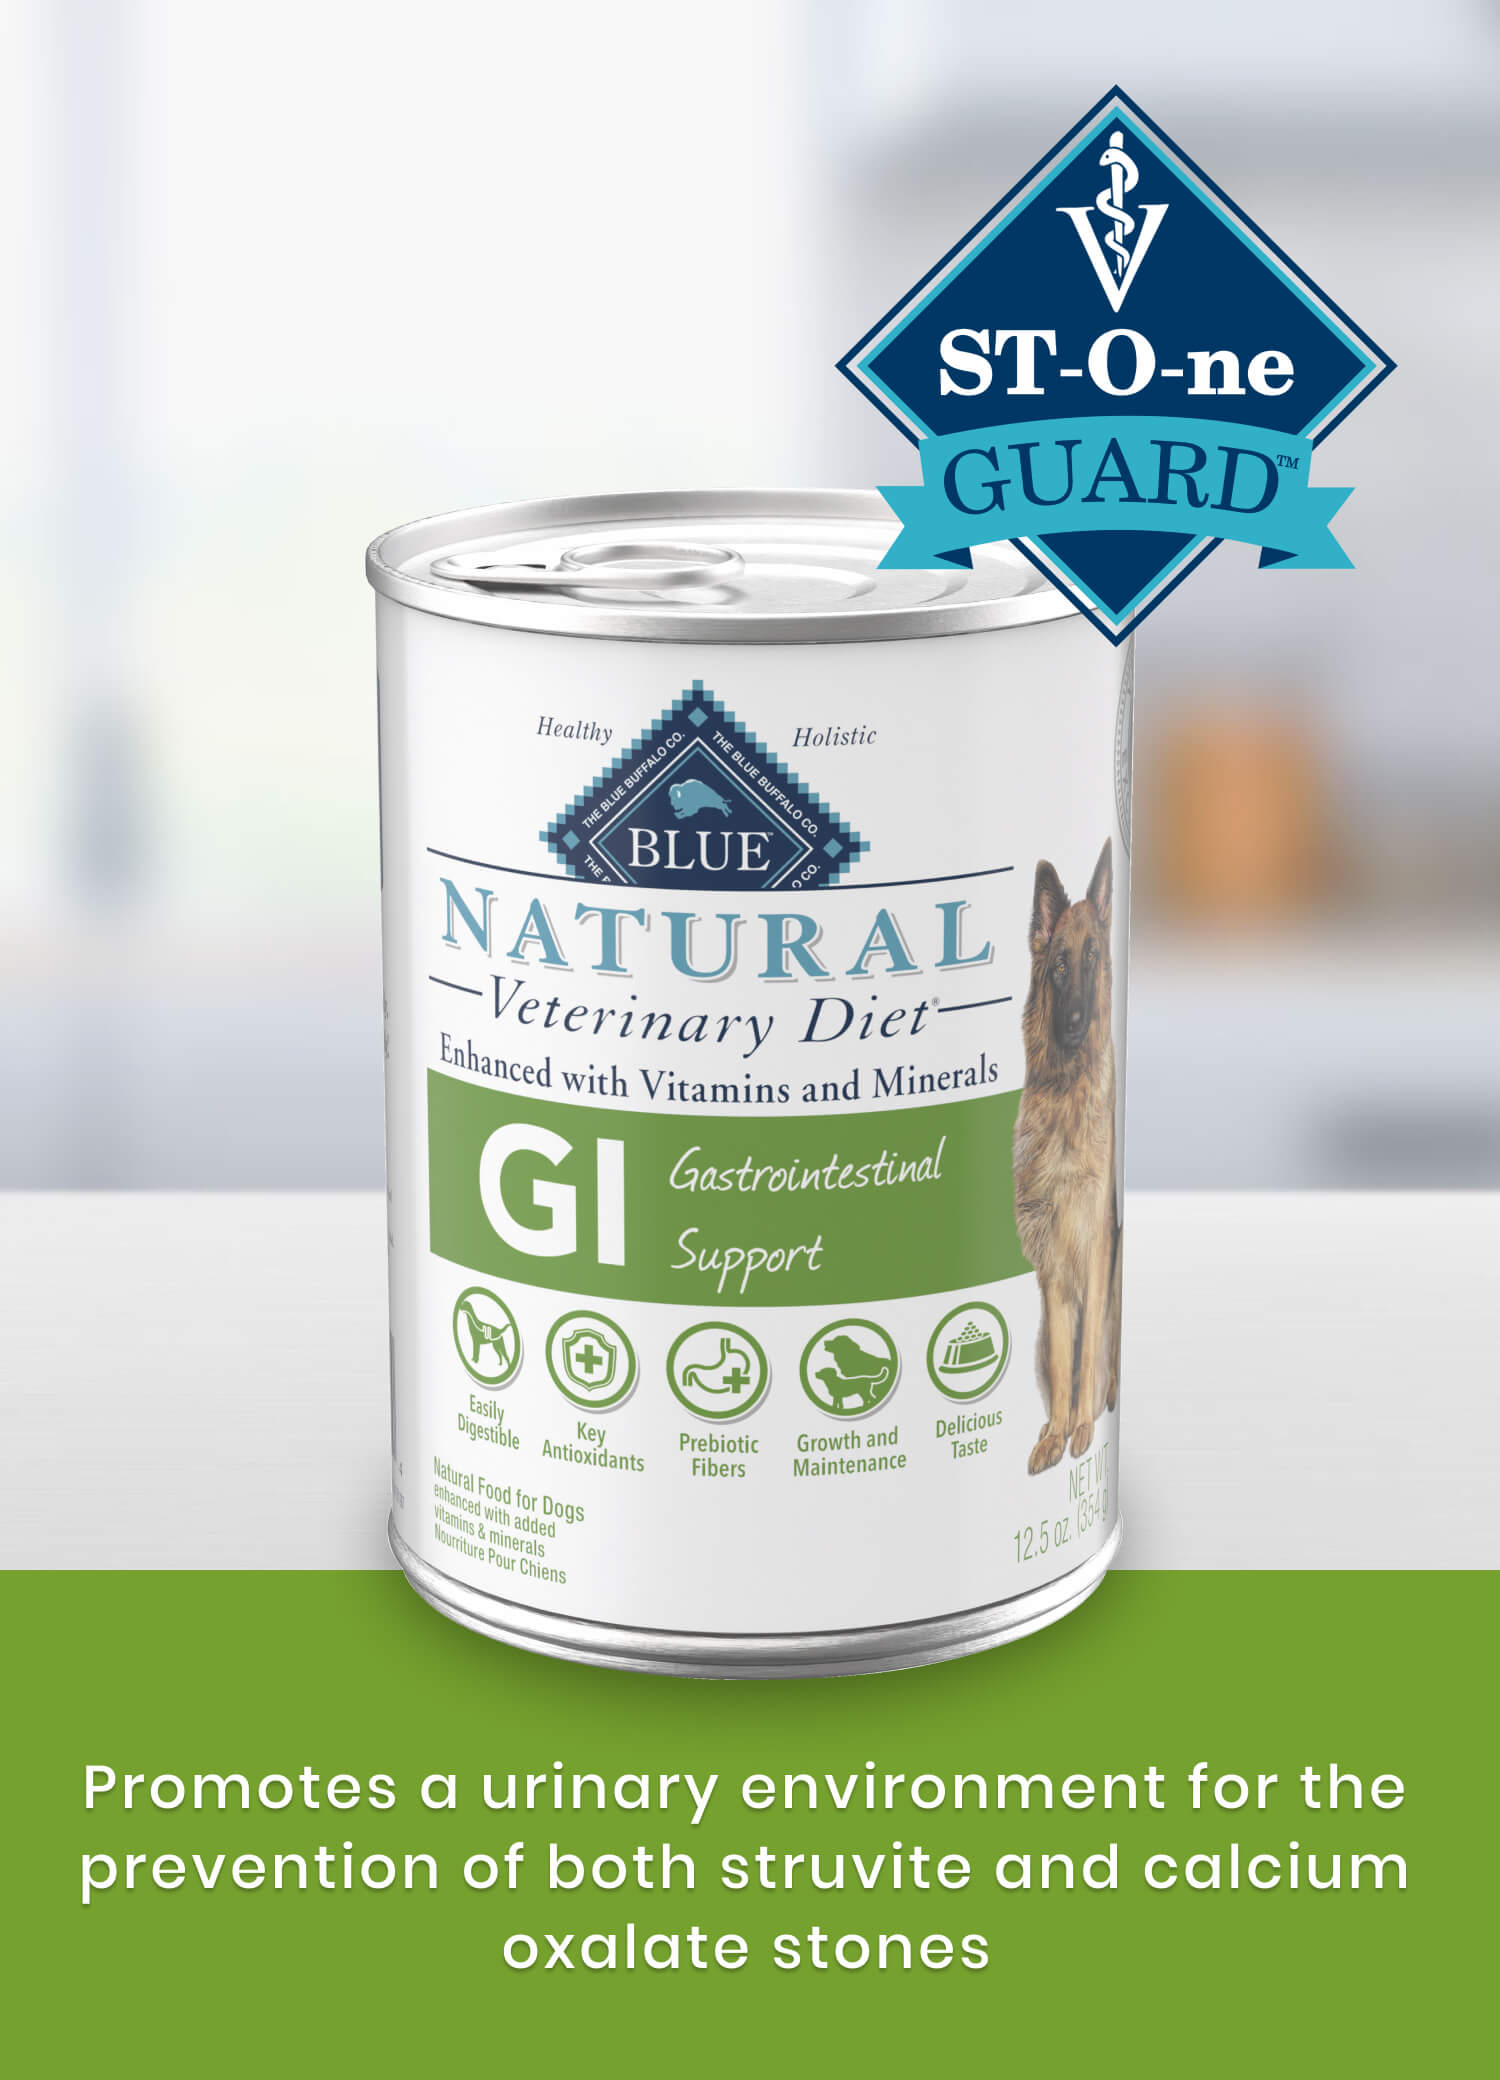 GI Gastrointestinal Support St-O-ne Guard Promotes a urinary environment for the prevention of both struvite and calcium oxalate stones